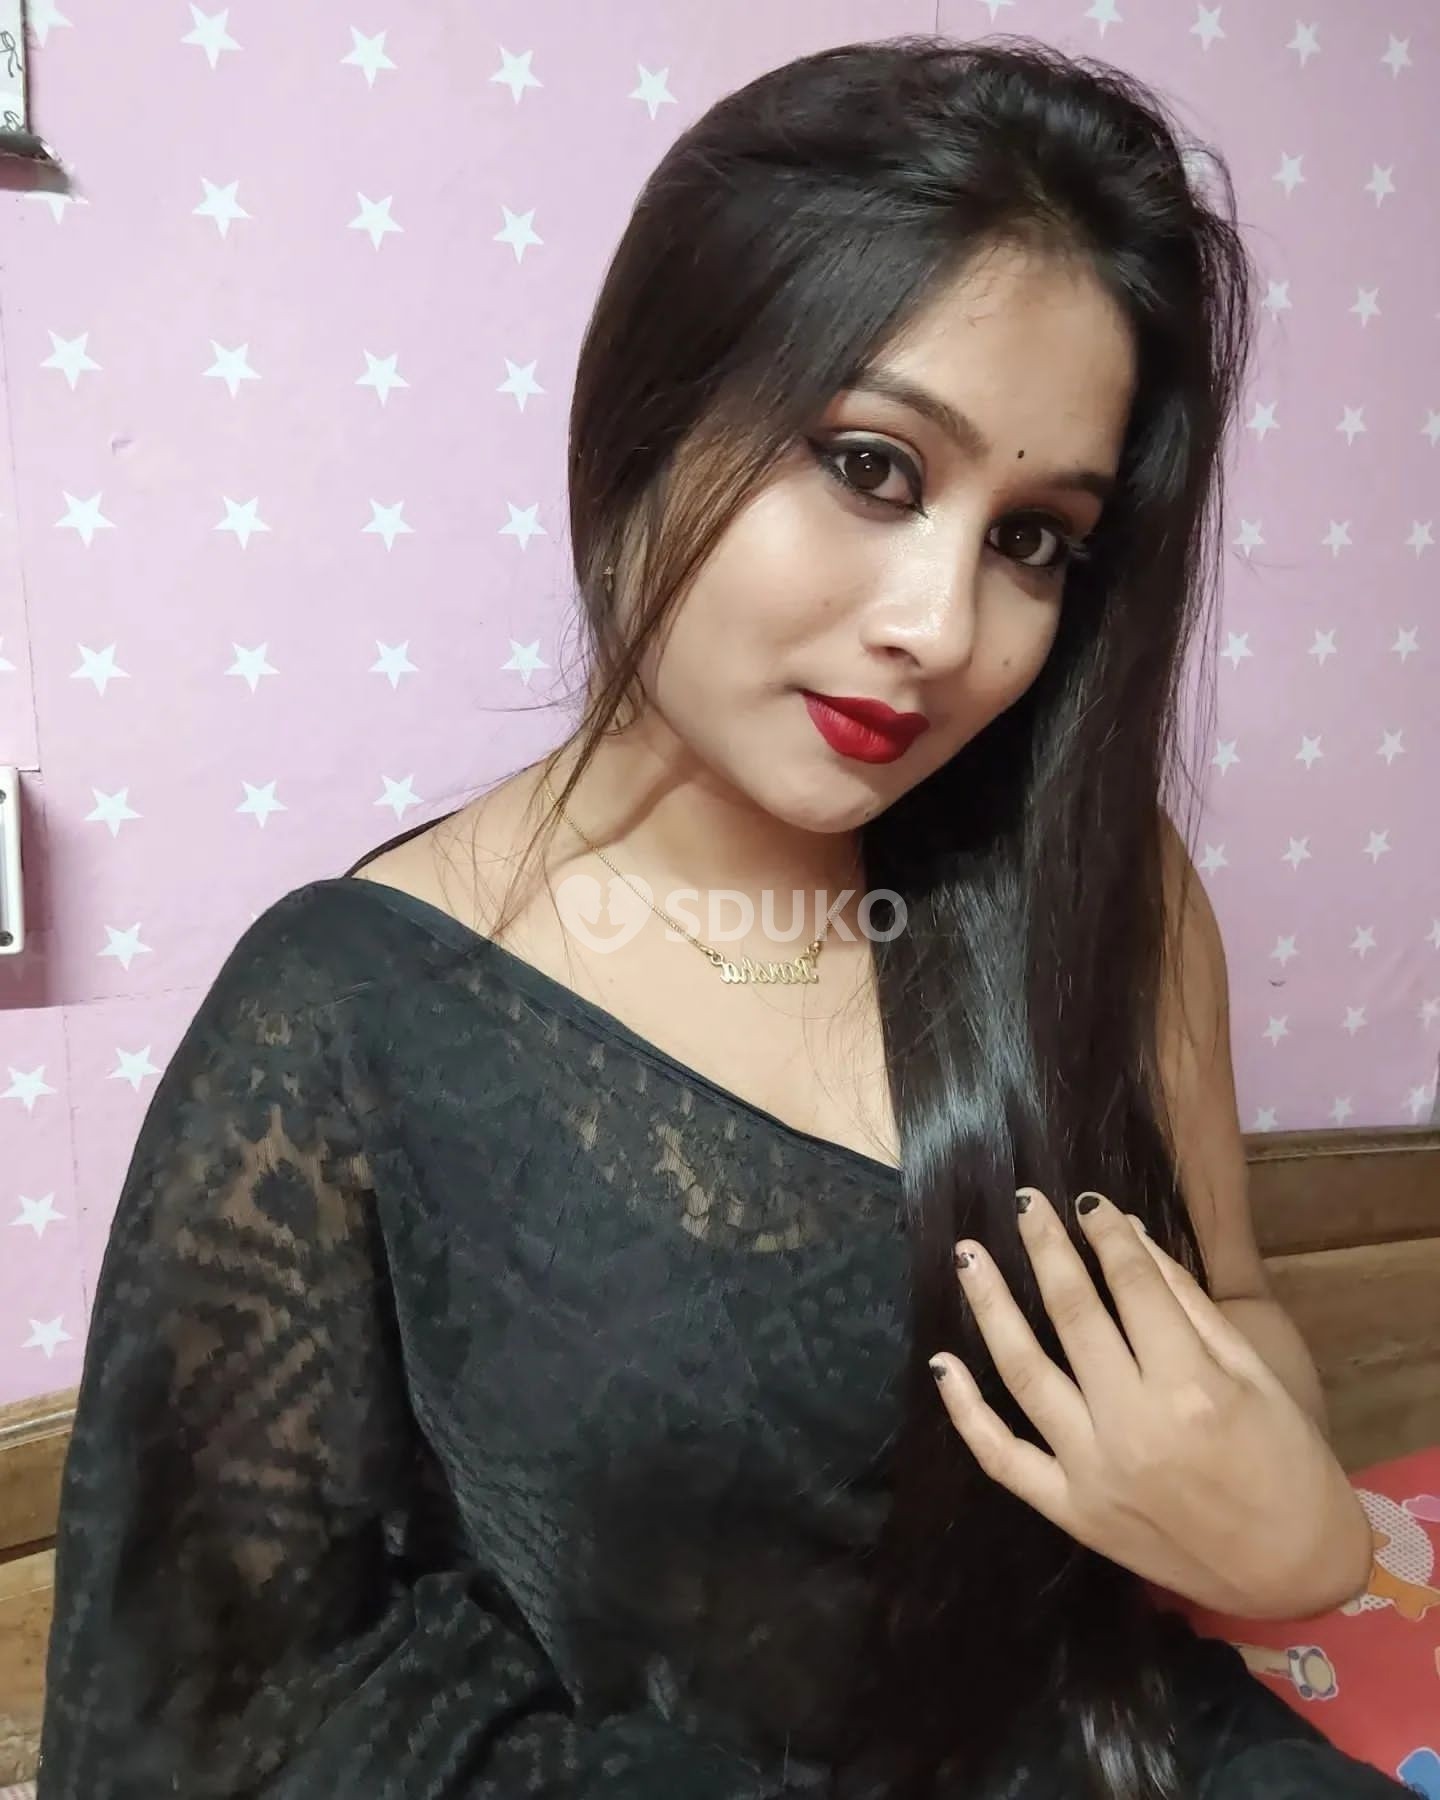 INDORE 🆑 TODAY LOW PRICE 100% SAFE AND SECURE GENUINE CALL GIRL AFFORDABLE PRICE CALL NOW 24/7 AVAILABLE ANYTIME CALL